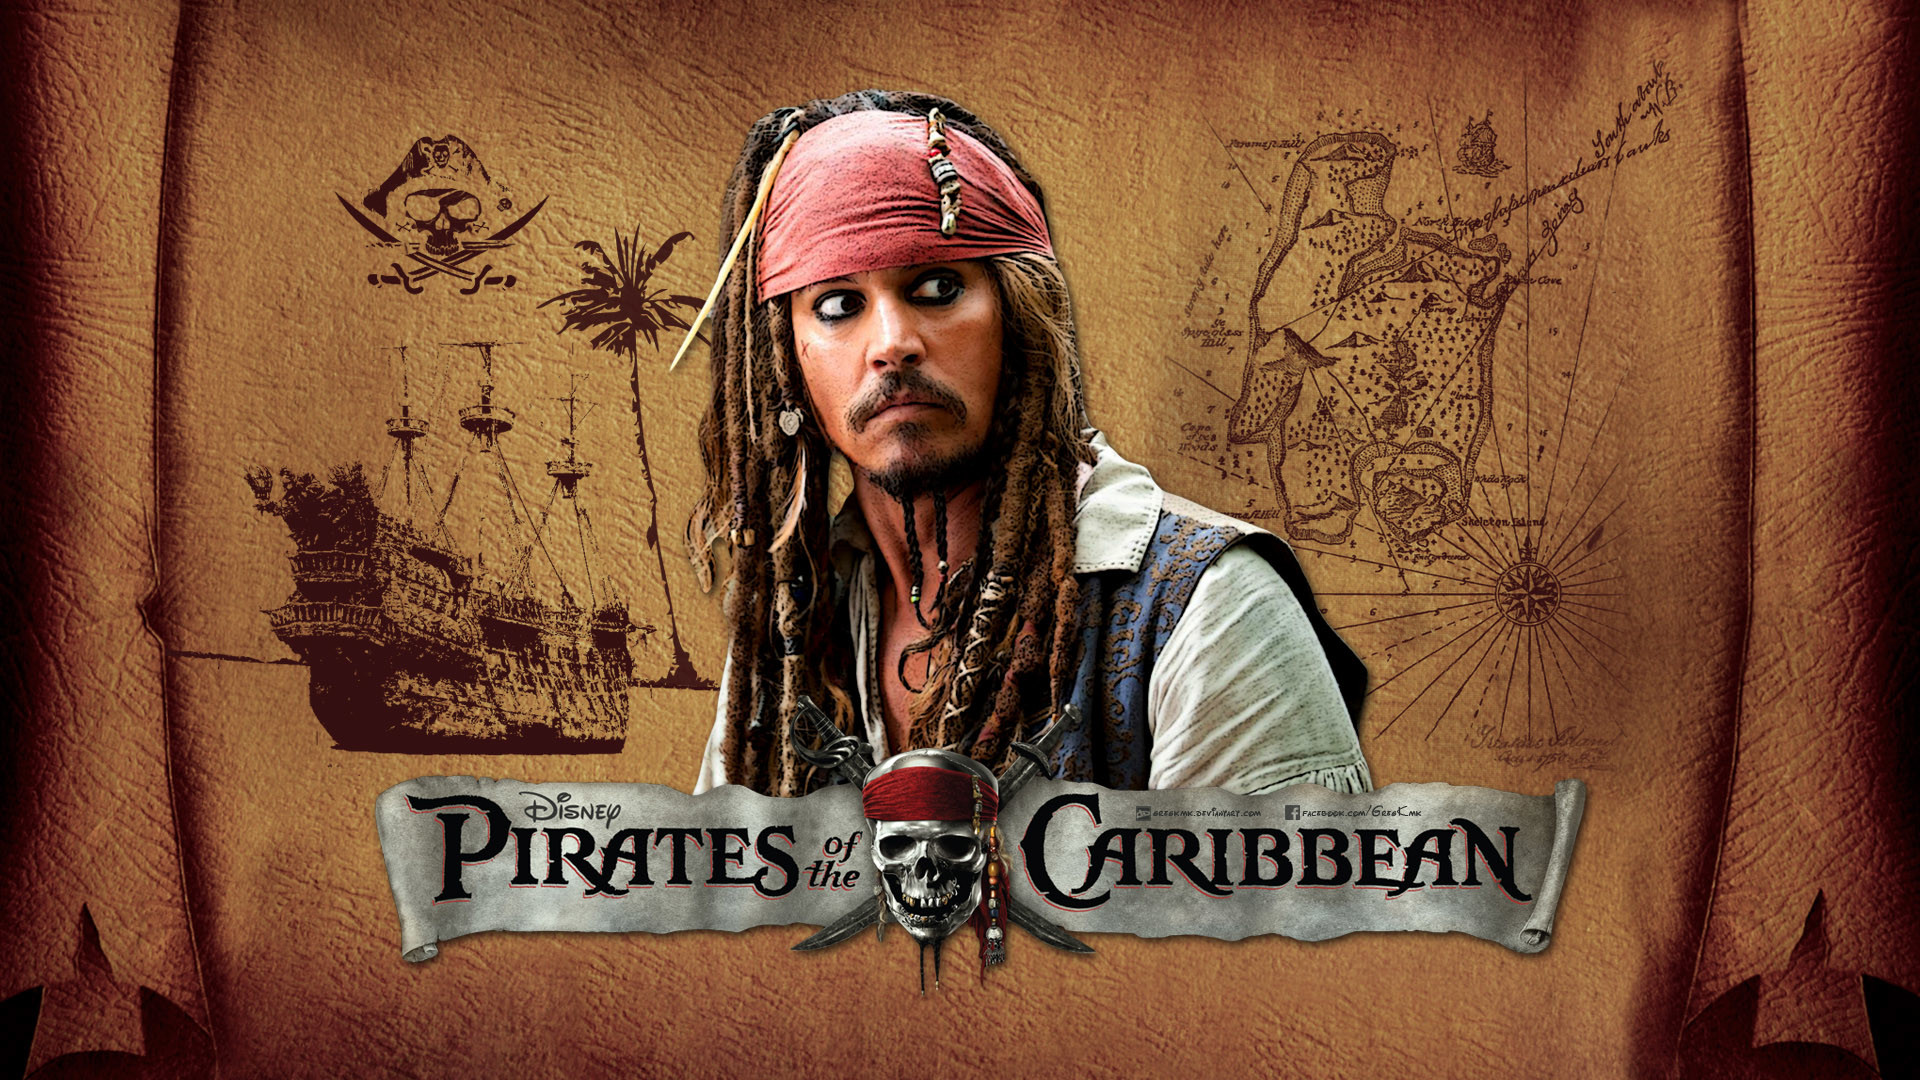 1920x1080 ... Pirates of the Caribbean Wallpaper by GregKmk